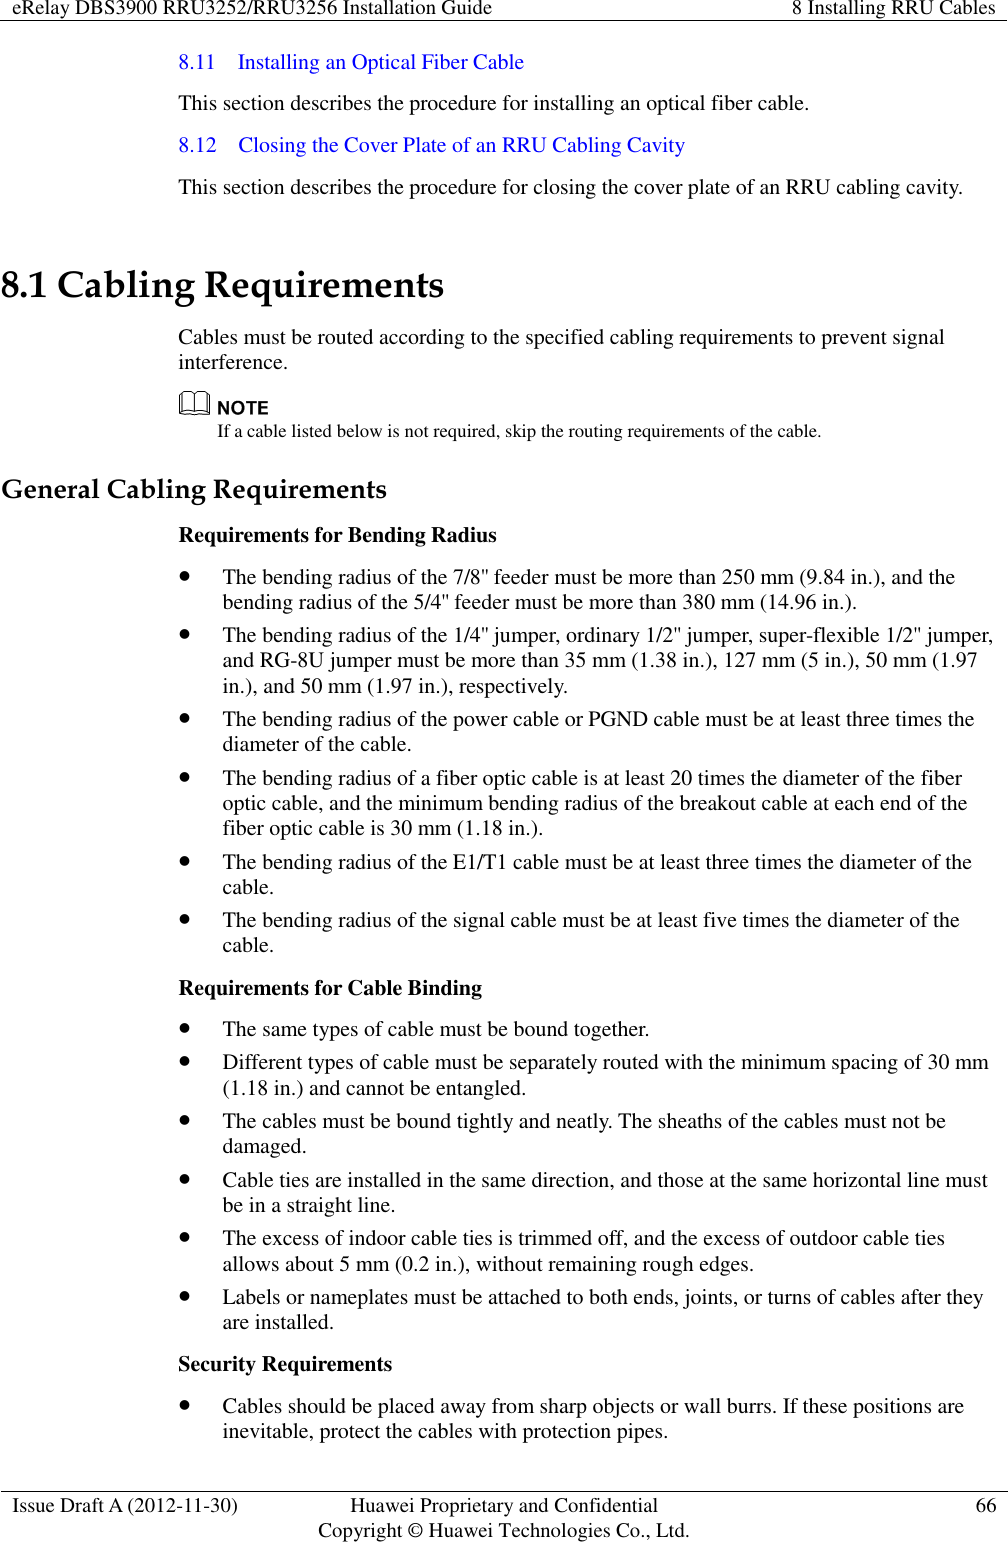 eRelay DBS3900 RRU3252/RRU3256 Installation Guide 8 Installing RRU Cables  Issue Draft A (2012-11-30) Huawei Proprietary and Confidential                                     Copyright © Huawei Technologies Co., Ltd. 66  8.11    Installing an Optical Fiber Cable   This section describes the procedure for installing an optical fiber cable. 8.12    Closing the Cover Plate of an RRU Cabling Cavity This section describes the procedure for closing the cover plate of an RRU cabling cavity. 8.1 Cabling Requirements Cables must be routed according to the specified cabling requirements to prevent signal interference.  If a cable listed below is not required, skip the routing requirements of the cable. General Cabling Requirements Requirements for Bending Radius  The bending radius of the 7/8&apos;&apos; feeder must be more than 250 mm (9.84 in.), and the bending radius of the 5/4&apos;&apos; feeder must be more than 380 mm (14.96 in.).  The bending radius of the 1/4&apos;&apos; jumper, ordinary 1/2&apos;&apos; jumper, super-flexible 1/2&apos;&apos; jumper, and RG-8U jumper must be more than 35 mm (1.38 in.), 127 mm (5 in.), 50 mm (1.97 in.), and 50 mm (1.97 in.), respectively.  The bending radius of the power cable or PGND cable must be at least three times the diameter of the cable.  The bending radius of a fiber optic cable is at least 20 times the diameter of the fiber optic cable, and the minimum bending radius of the breakout cable at each end of the fiber optic cable is 30 mm (1.18 in.).  The bending radius of the E1/T1 cable must be at least three times the diameter of the cable.  The bending radius of the signal cable must be at least five times the diameter of the cable. Requirements for Cable Binding  The same types of cable must be bound together.  Different types of cable must be separately routed with the minimum spacing of 30 mm (1.18 in.) and cannot be entangled.  The cables must be bound tightly and neatly. The sheaths of the cables must not be damaged.  Cable ties are installed in the same direction, and those at the same horizontal line must be in a straight line.  The excess of indoor cable ties is trimmed off, and the excess of outdoor cable ties allows about 5 mm (0.2 in.), without remaining rough edges.  Labels or nameplates must be attached to both ends, joints, or turns of cables after they are installed. Security Requirements  Cables should be placed away from sharp objects or wall burrs. If these positions are inevitable, protect the cables with protection pipes. 